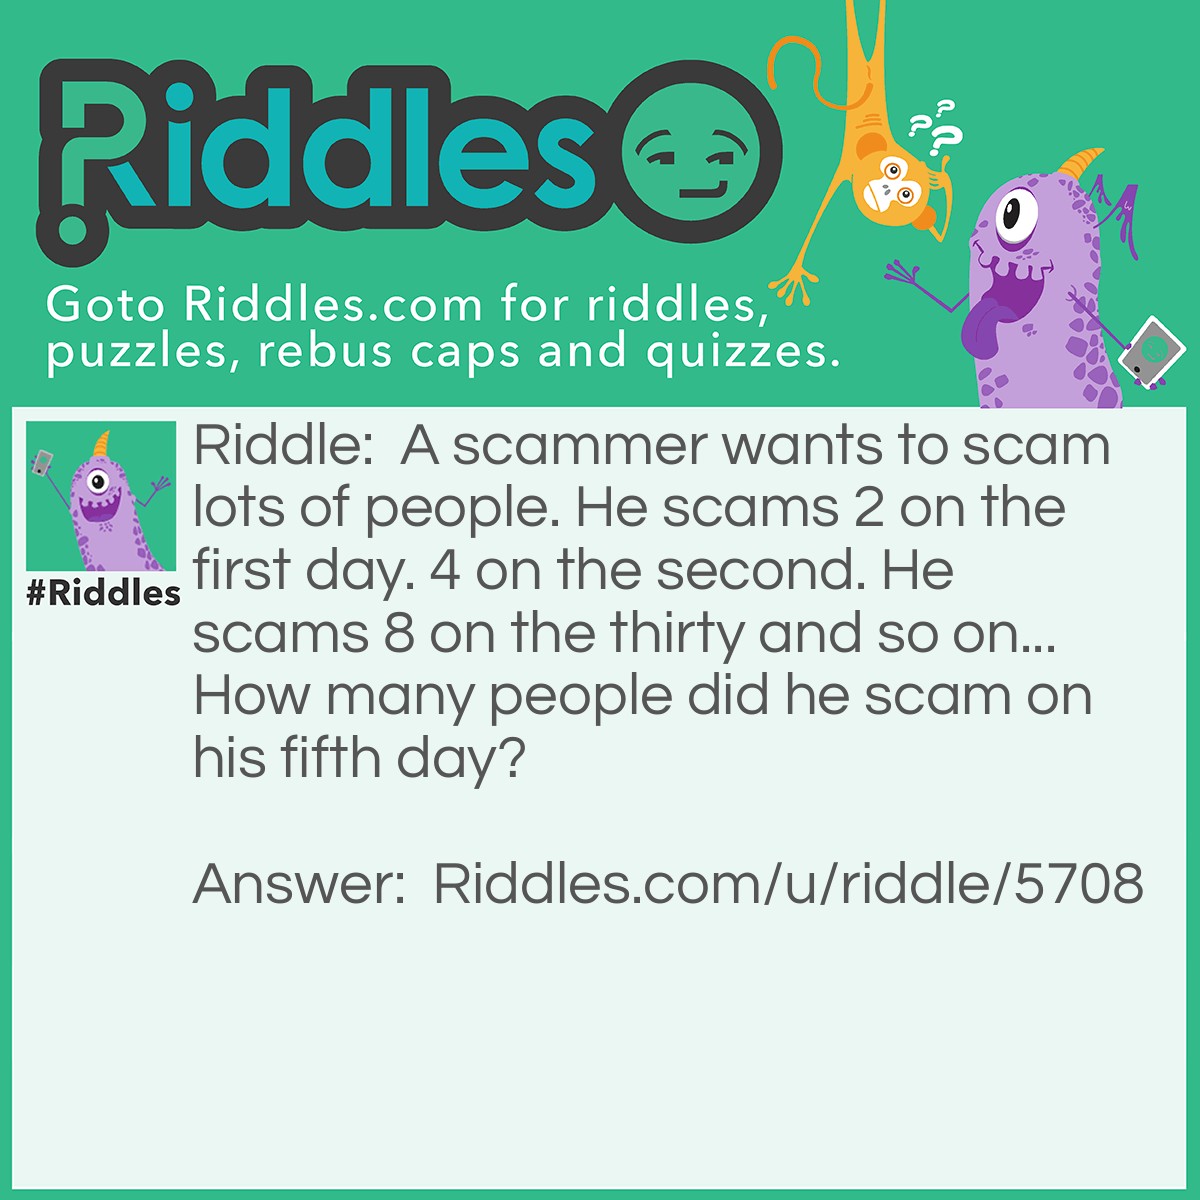 Riddle: A scammer wants to scam lots of people. He scams 2 on the first day. 4 on the second. He scams 8 on the thirty and so on... How many people did he scam on his fifth day? Answer: 16. 8 x 2 =16